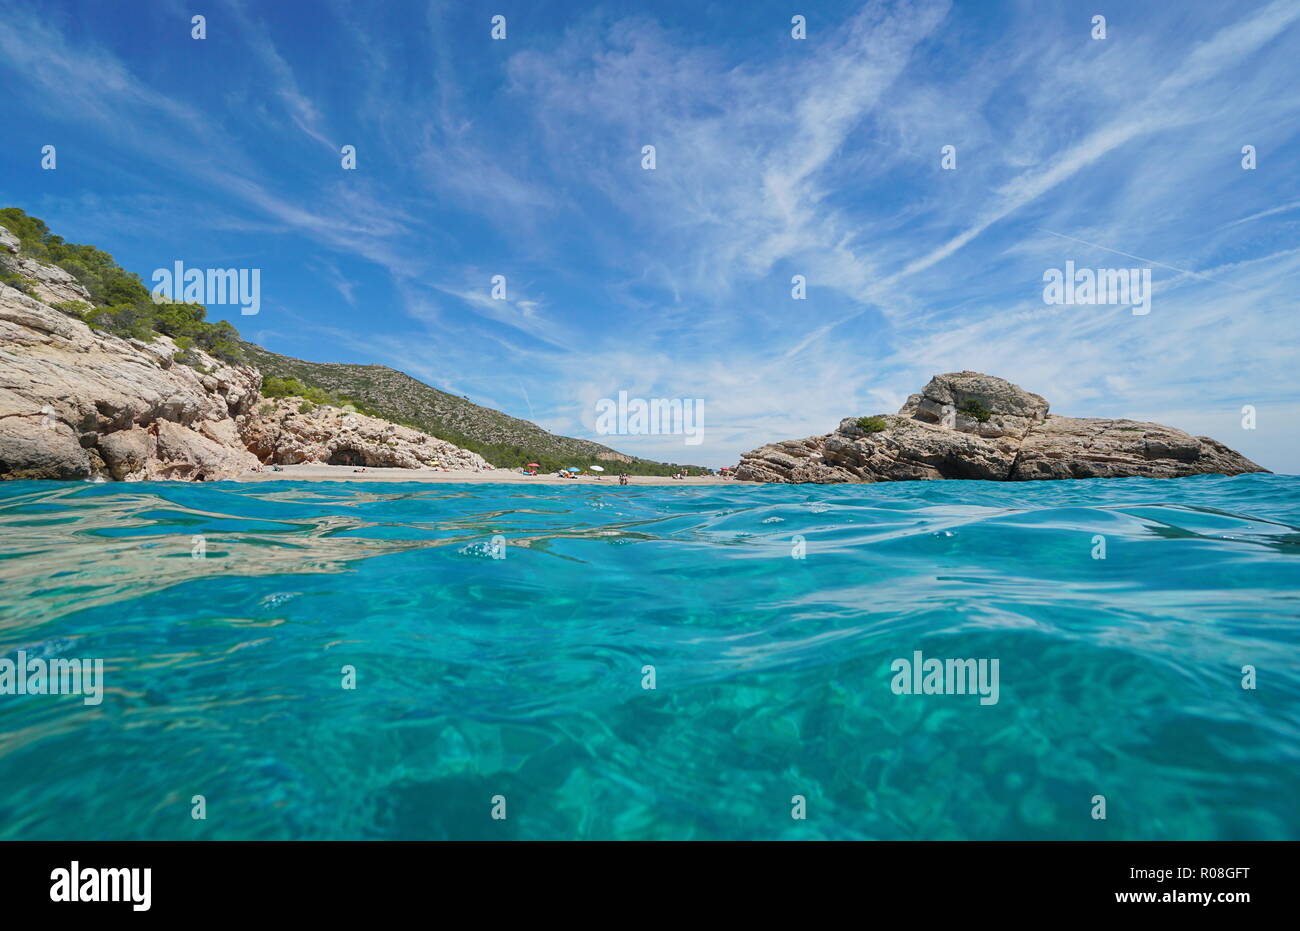 Spain Costa Dorada, the beach and the islet of Torn seen from the water surface, l’Hospitalet de l’Infant, Mediterranean sea, Tarragona, Catalonia Stock Photo